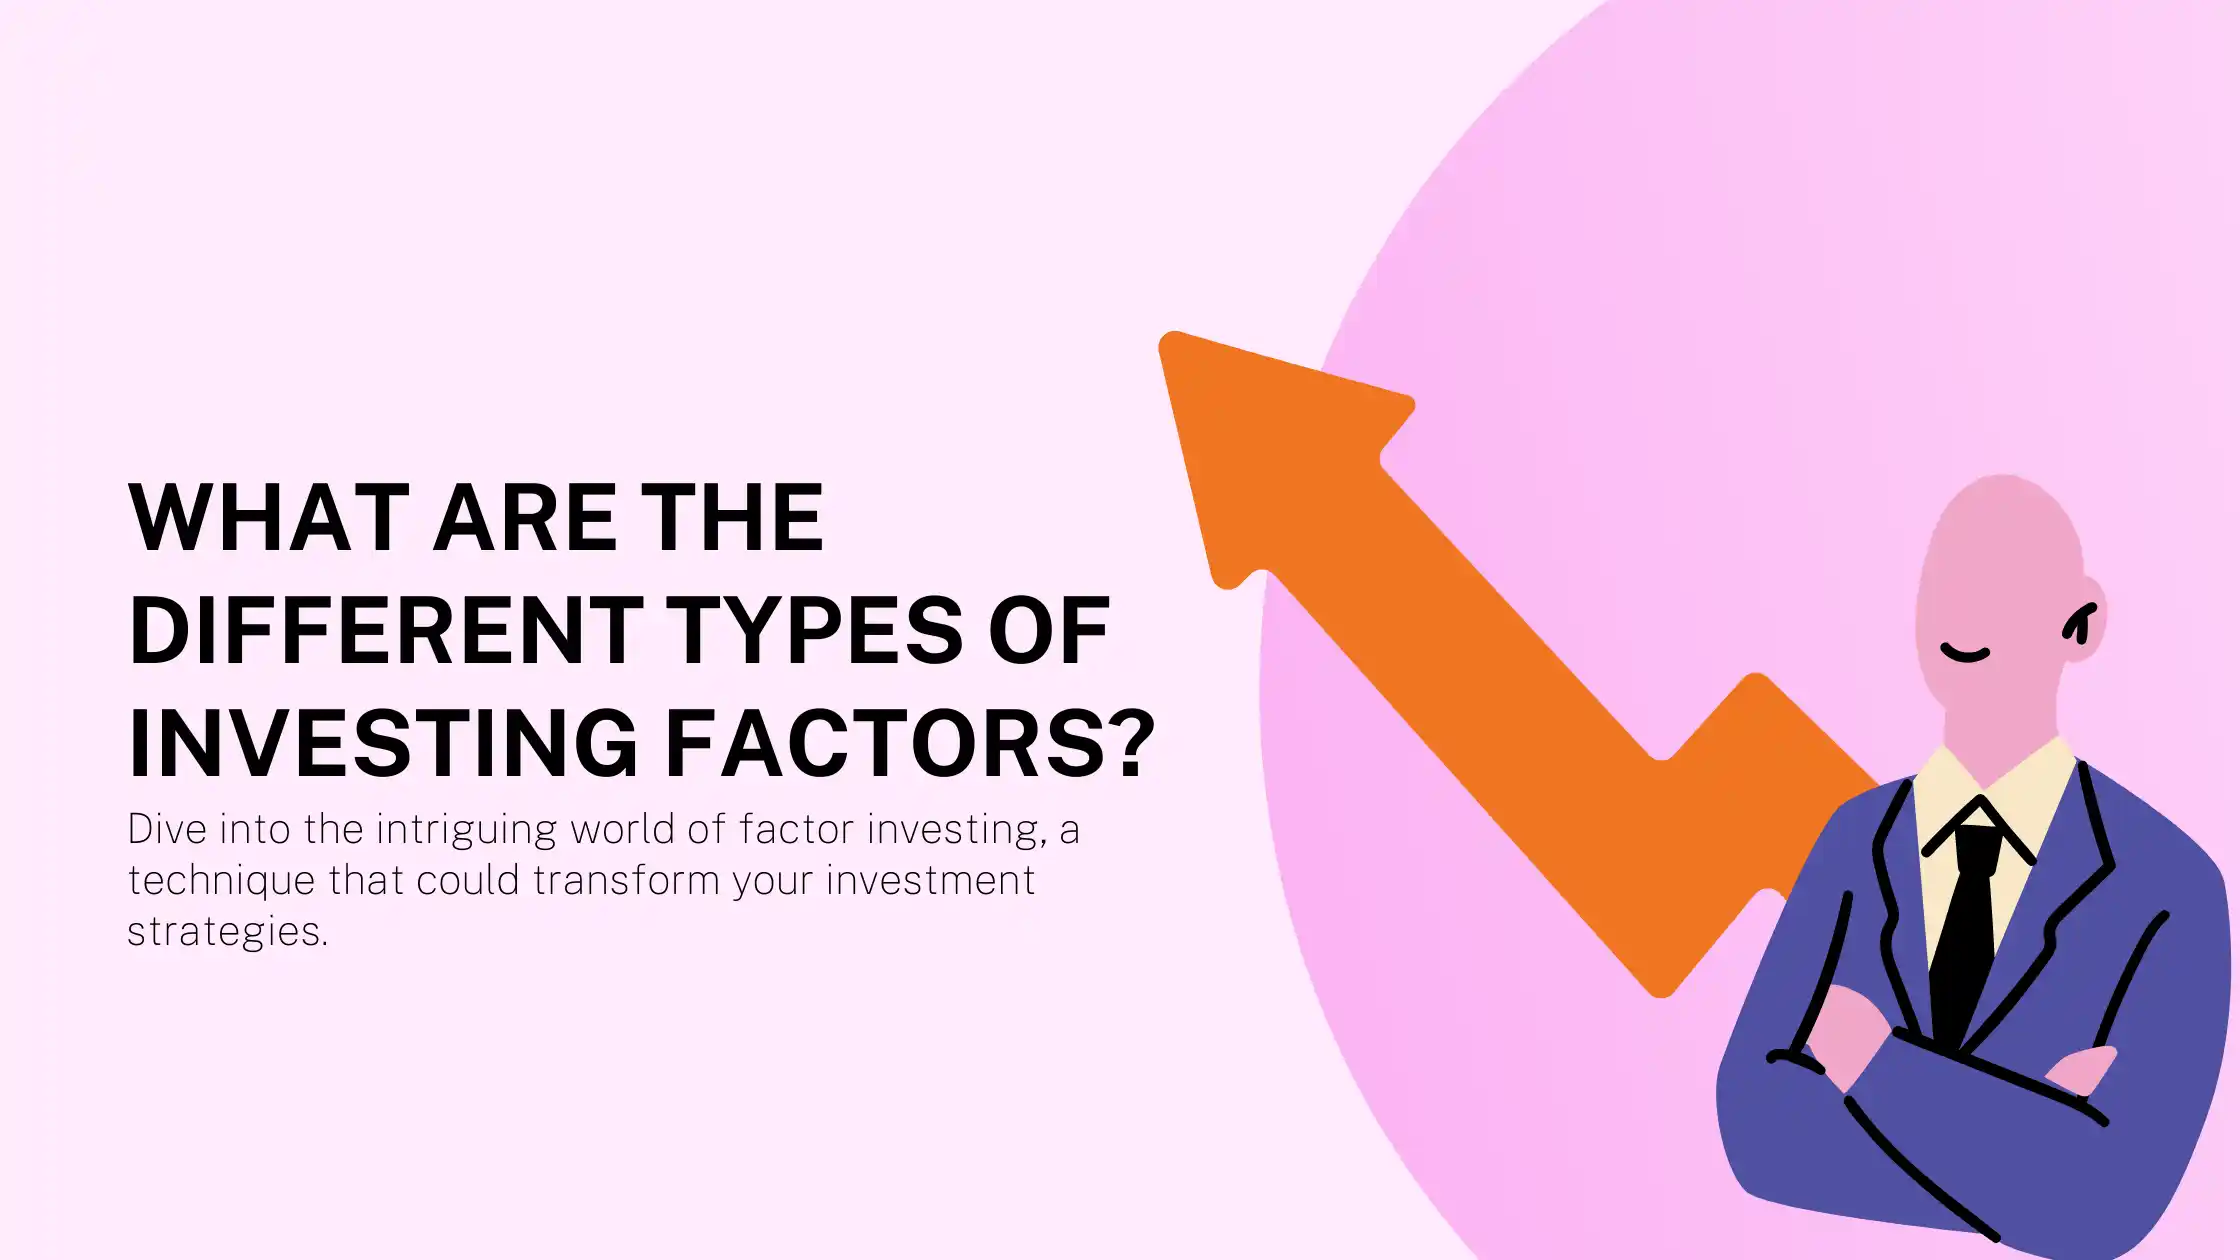 What are the different types of Investing Factors?